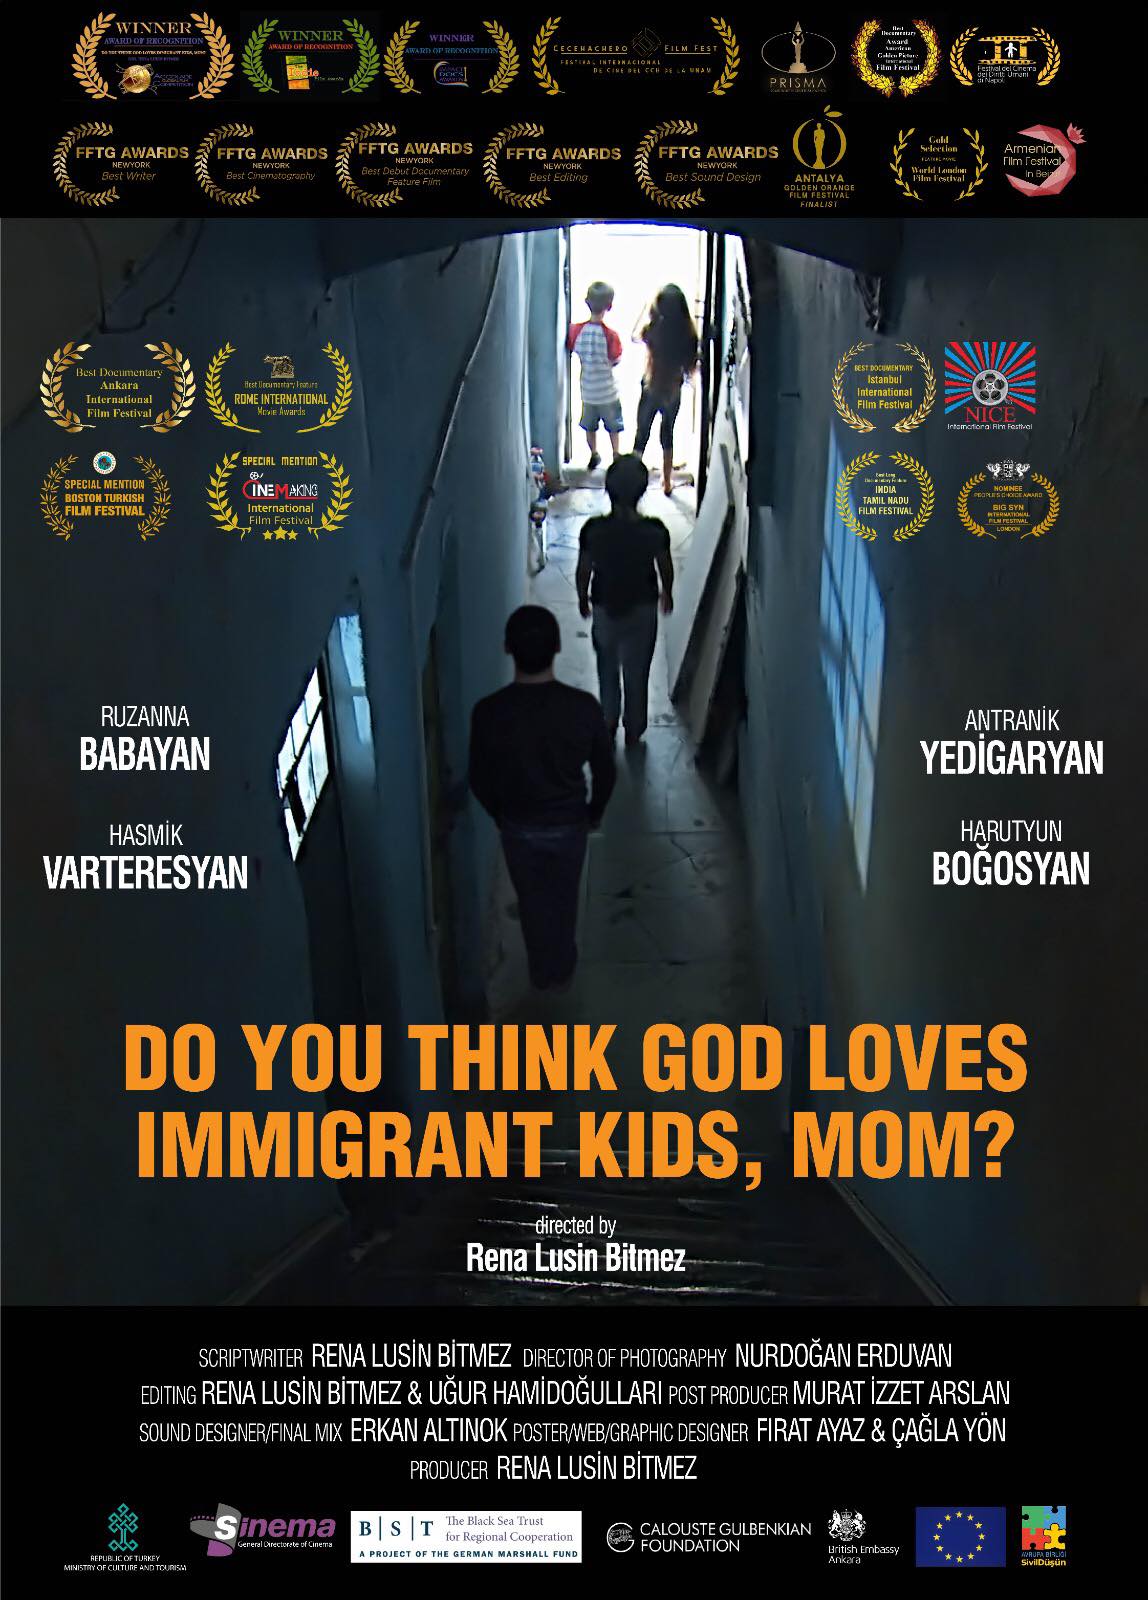 four children in a dark hallway with an open door, film cover for "Do You Think God Loves Immigrant Kids, Mom?", produced and directed by Rena Lusin Bitmez